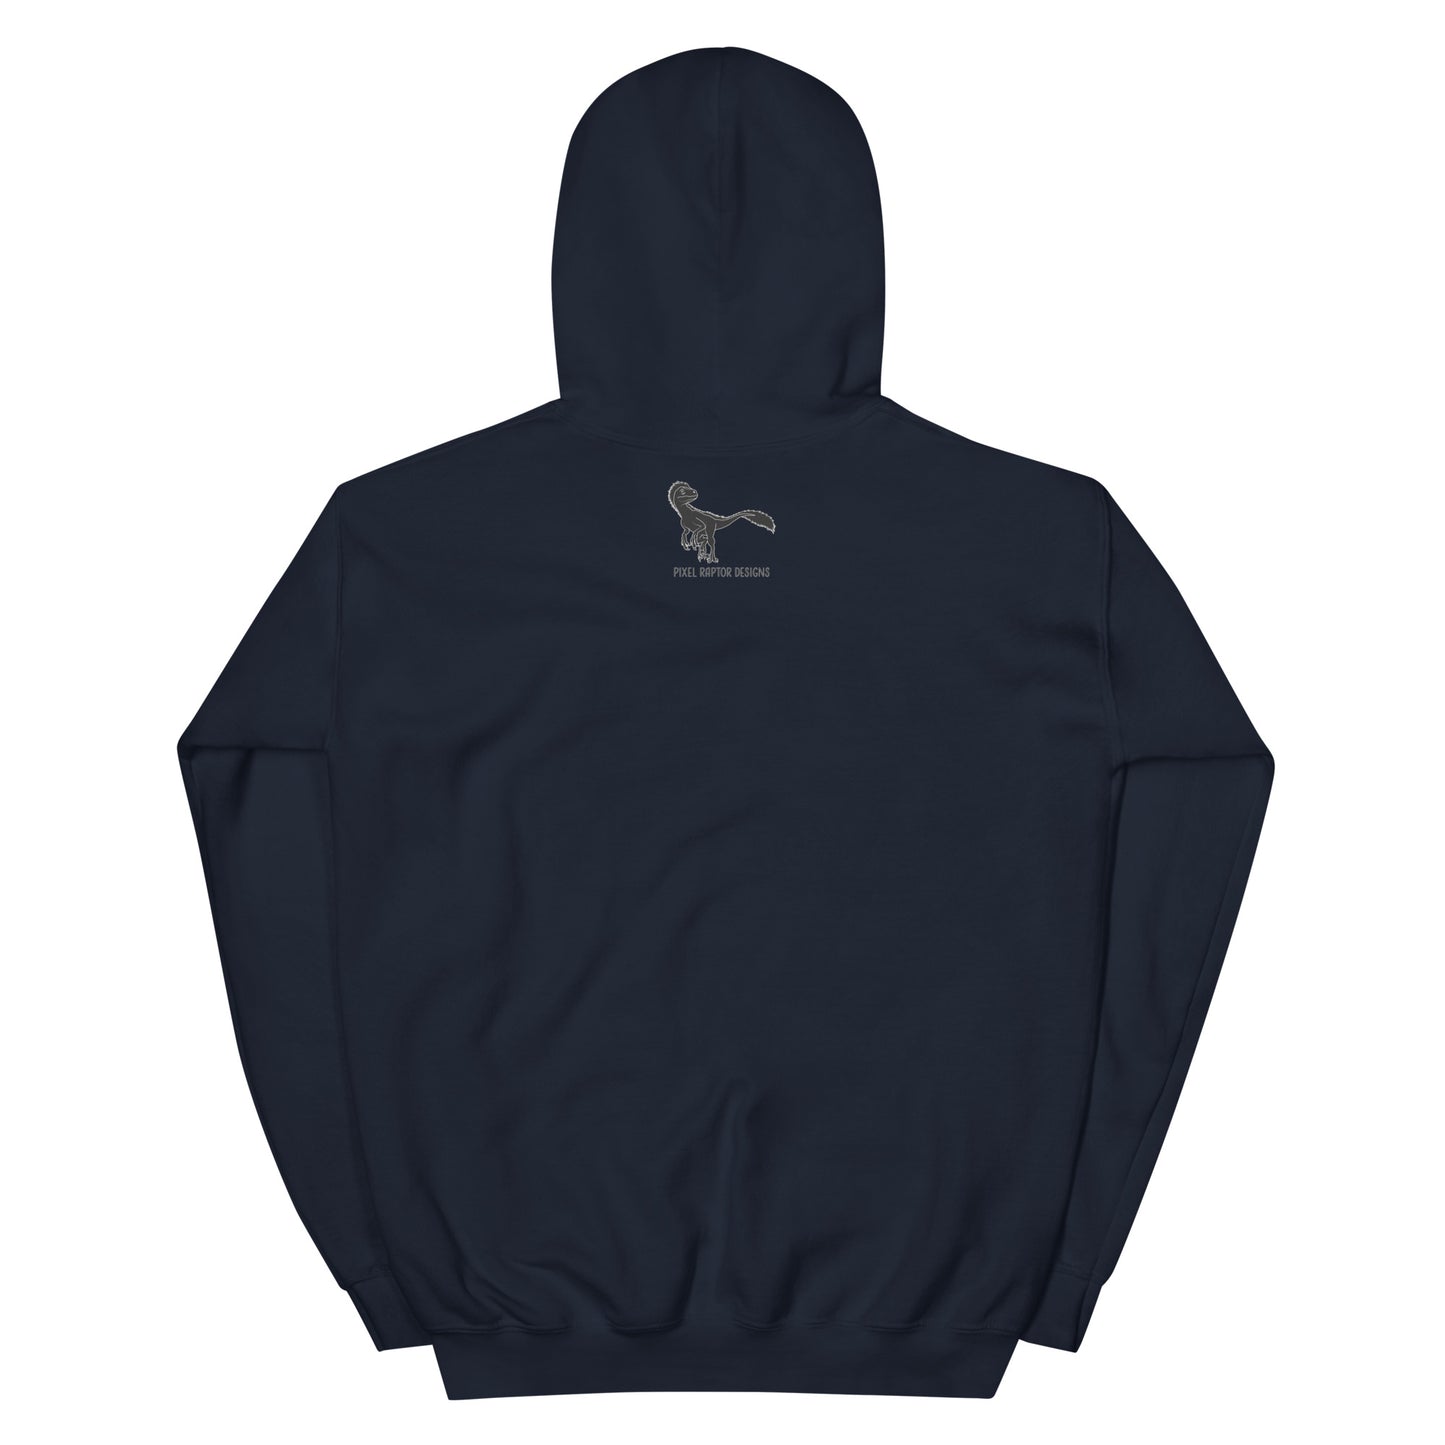 Blue Clever Girl Unisex Hoodie